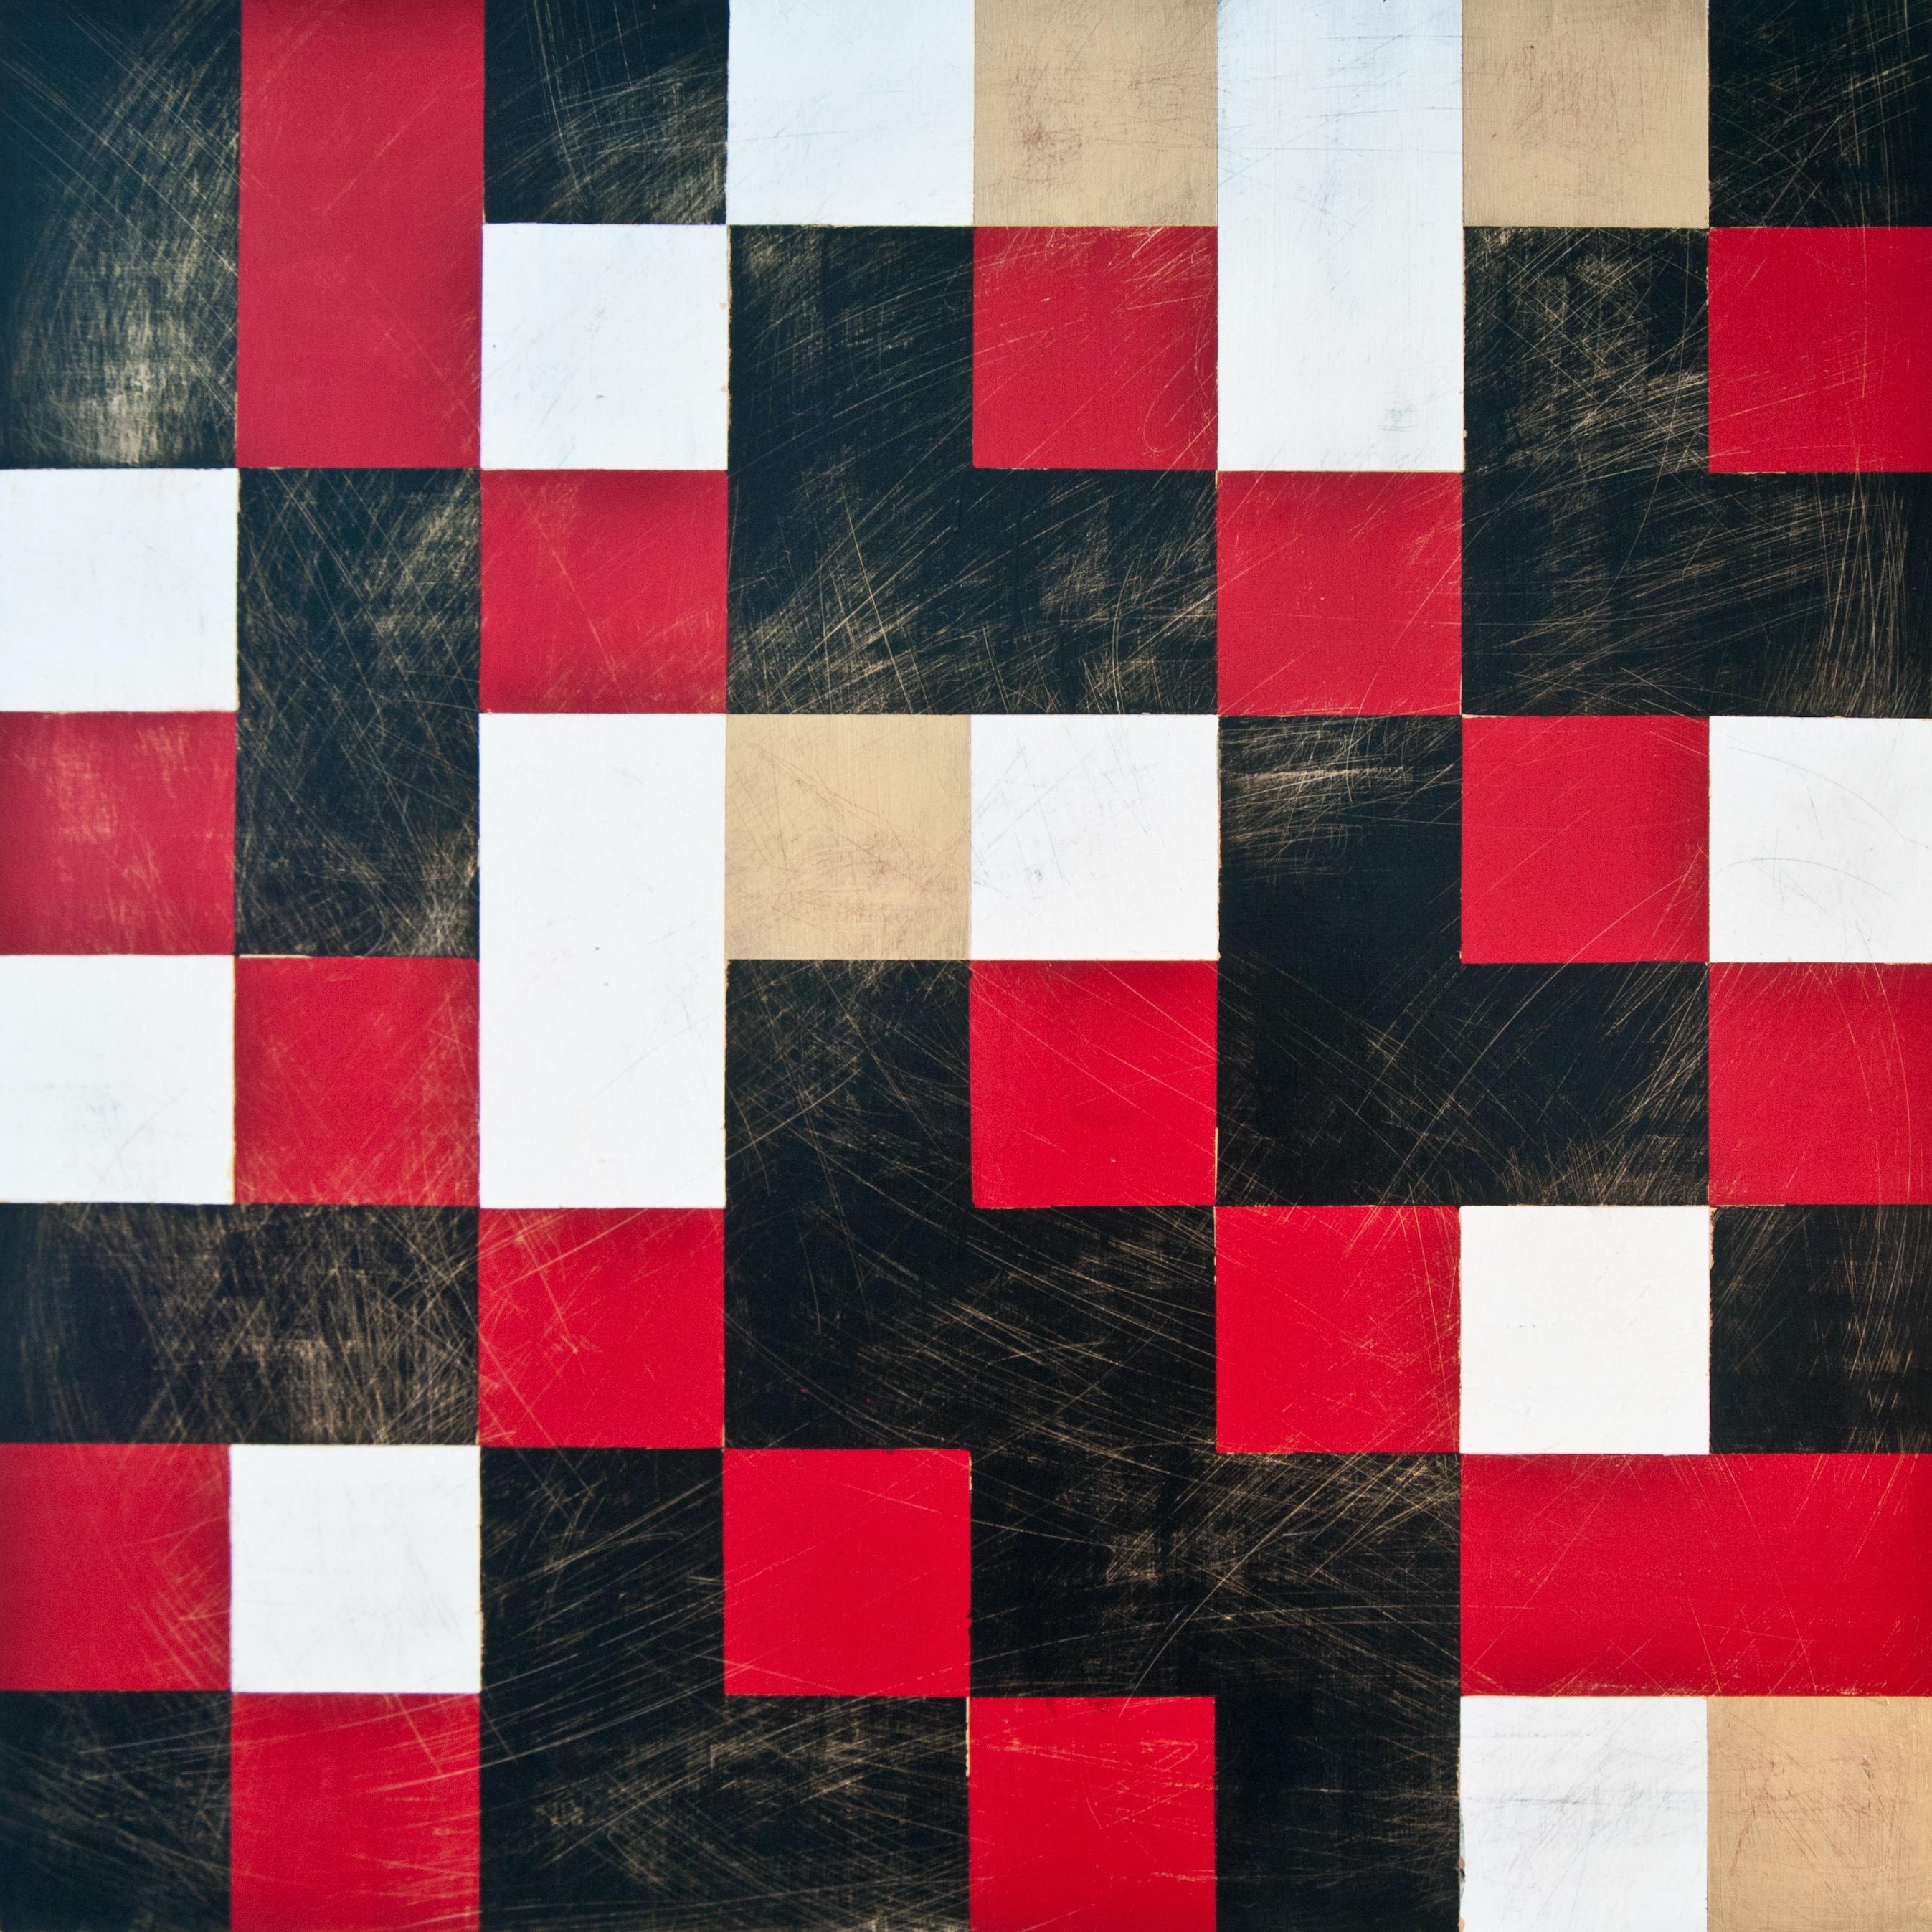 "Cipher Nine (Sense)", abstract, geometric, red, black, white, abstract painting - Painting by Denise Driscoll